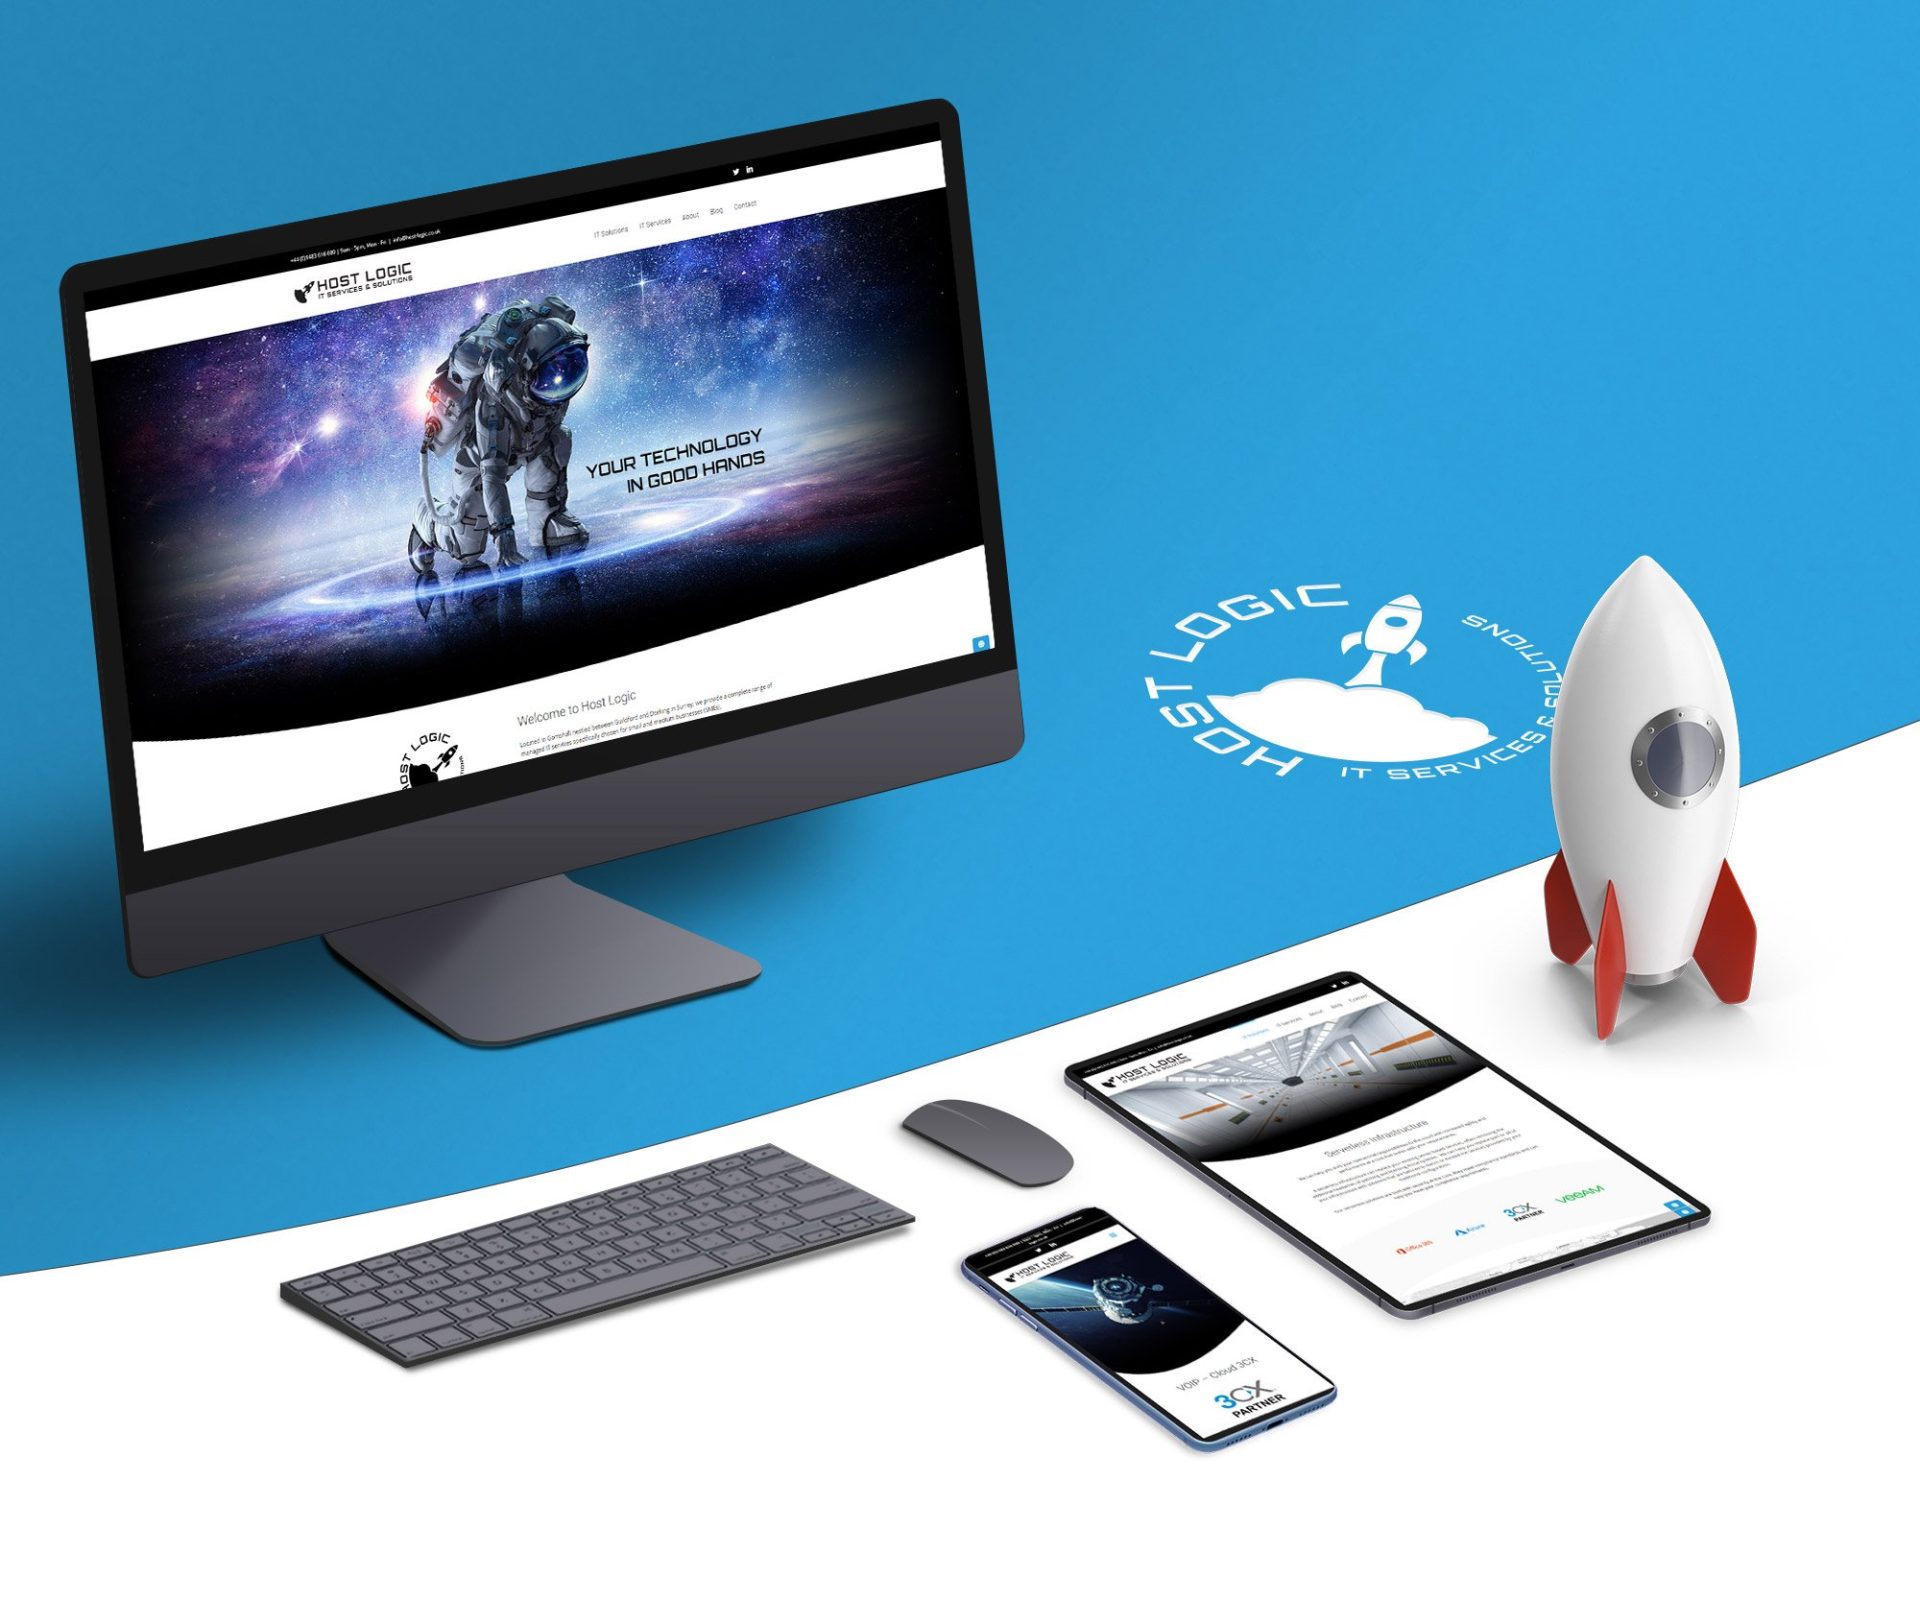 Host Logic logo and rocket with devices showing mobile variations of the website.